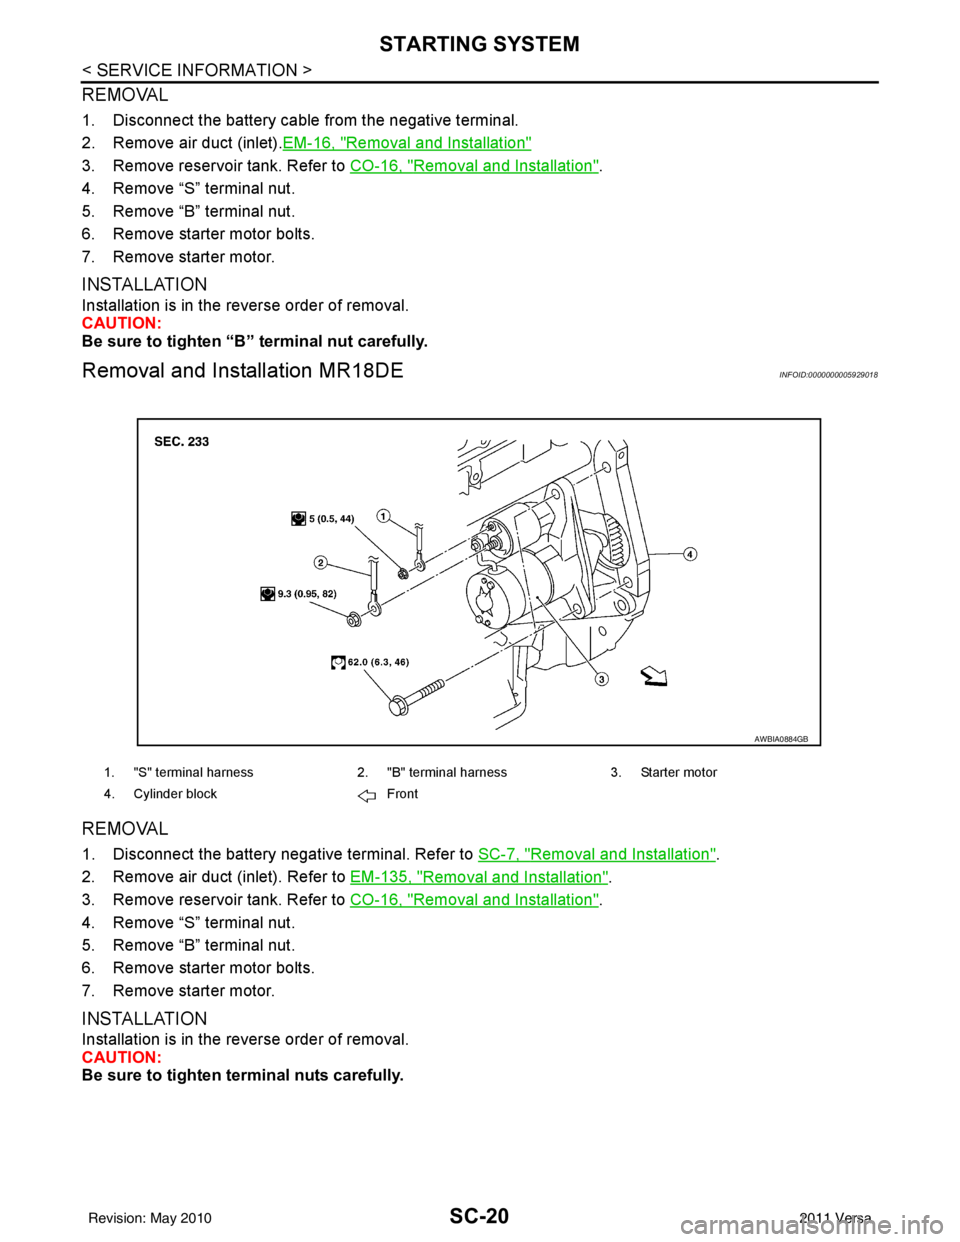 NISSAN TIIDA 2011  Service User Guide SC-20
< SERVICE INFORMATION >
STARTING SYSTEM
REMOVAL 
1. Disconnect the battery cable from the negative terminal.   
2. Remove air duct (inlet).EM-16, "
Removal and Installation"
3. Remove reservoir 